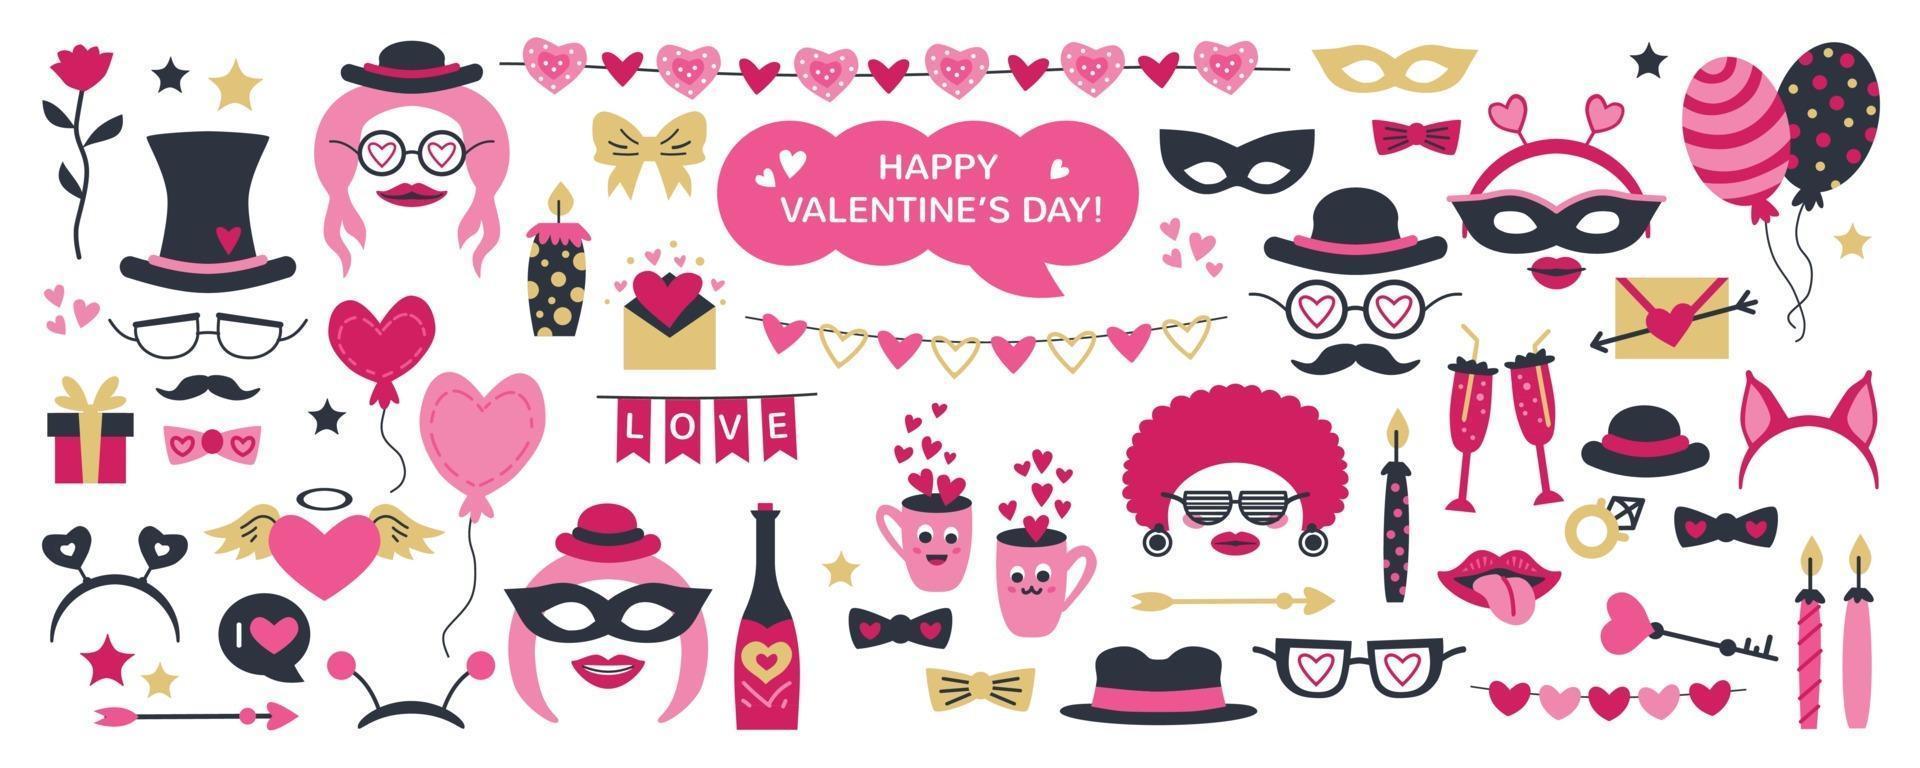 Cute Valentine Day photo booth props as set of party graphic elements vector